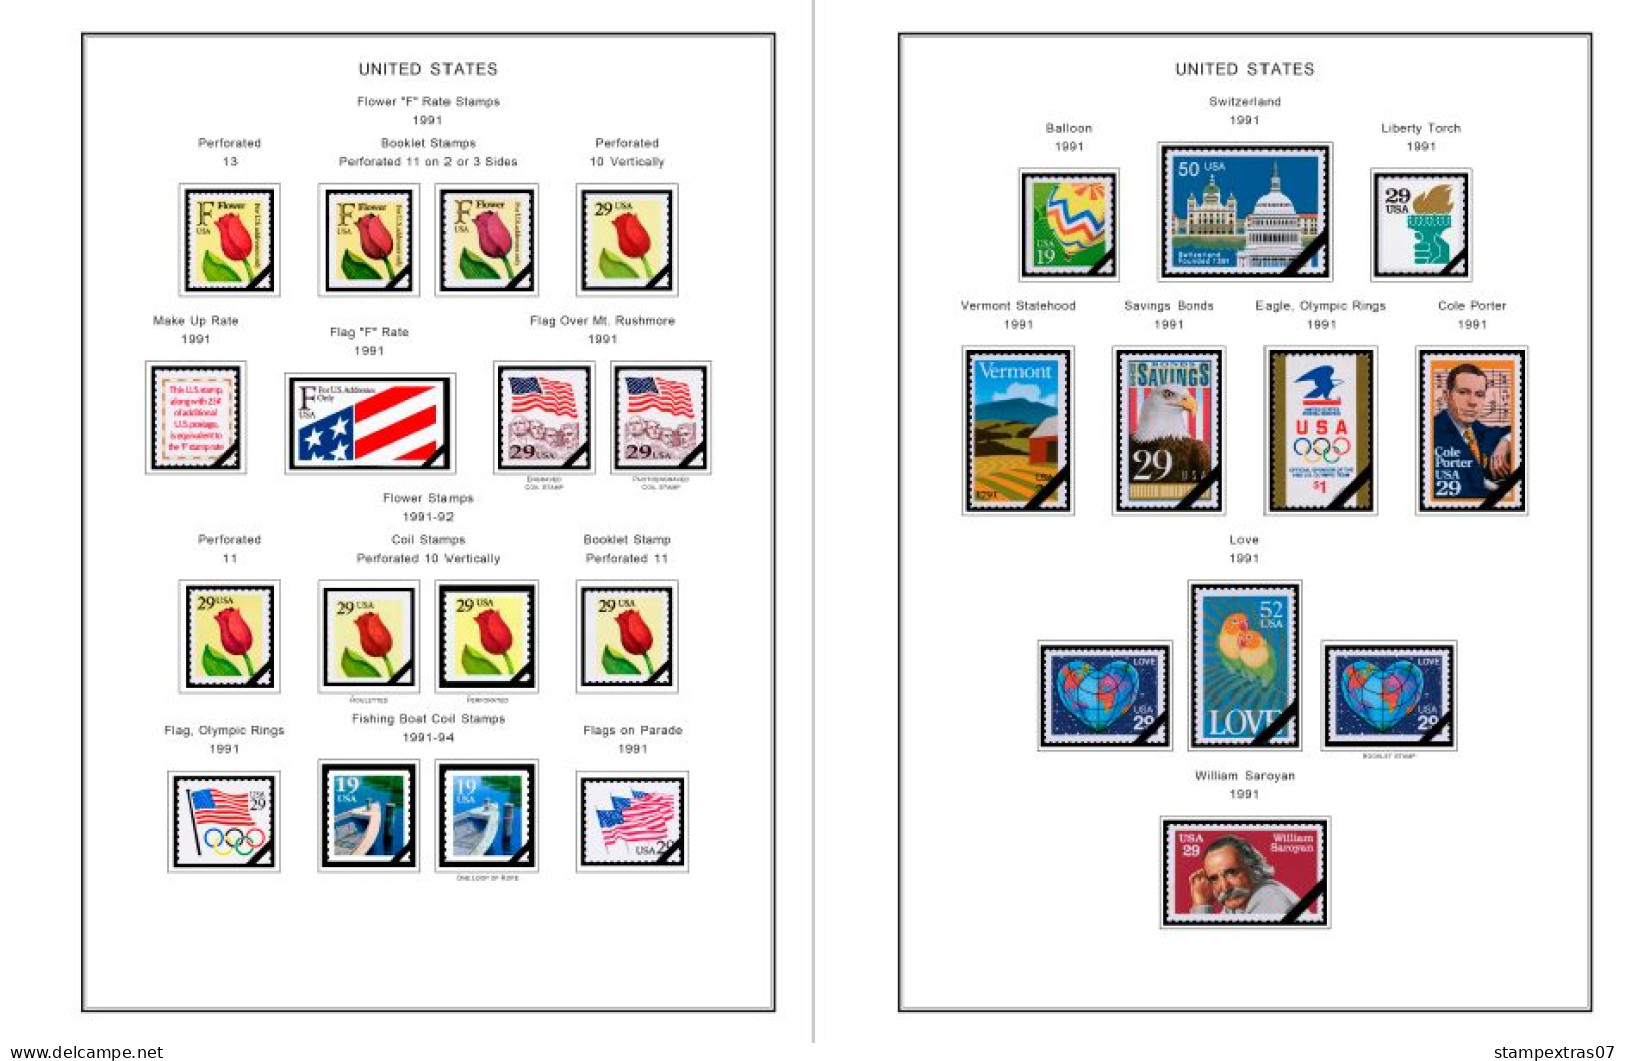 COLOR PRINTED USA 1991-1999 STAMP ALBUM PAGES (143 Illustrated Pages) >> FEUILLES ALBUM - Afgedrukte Pagina's